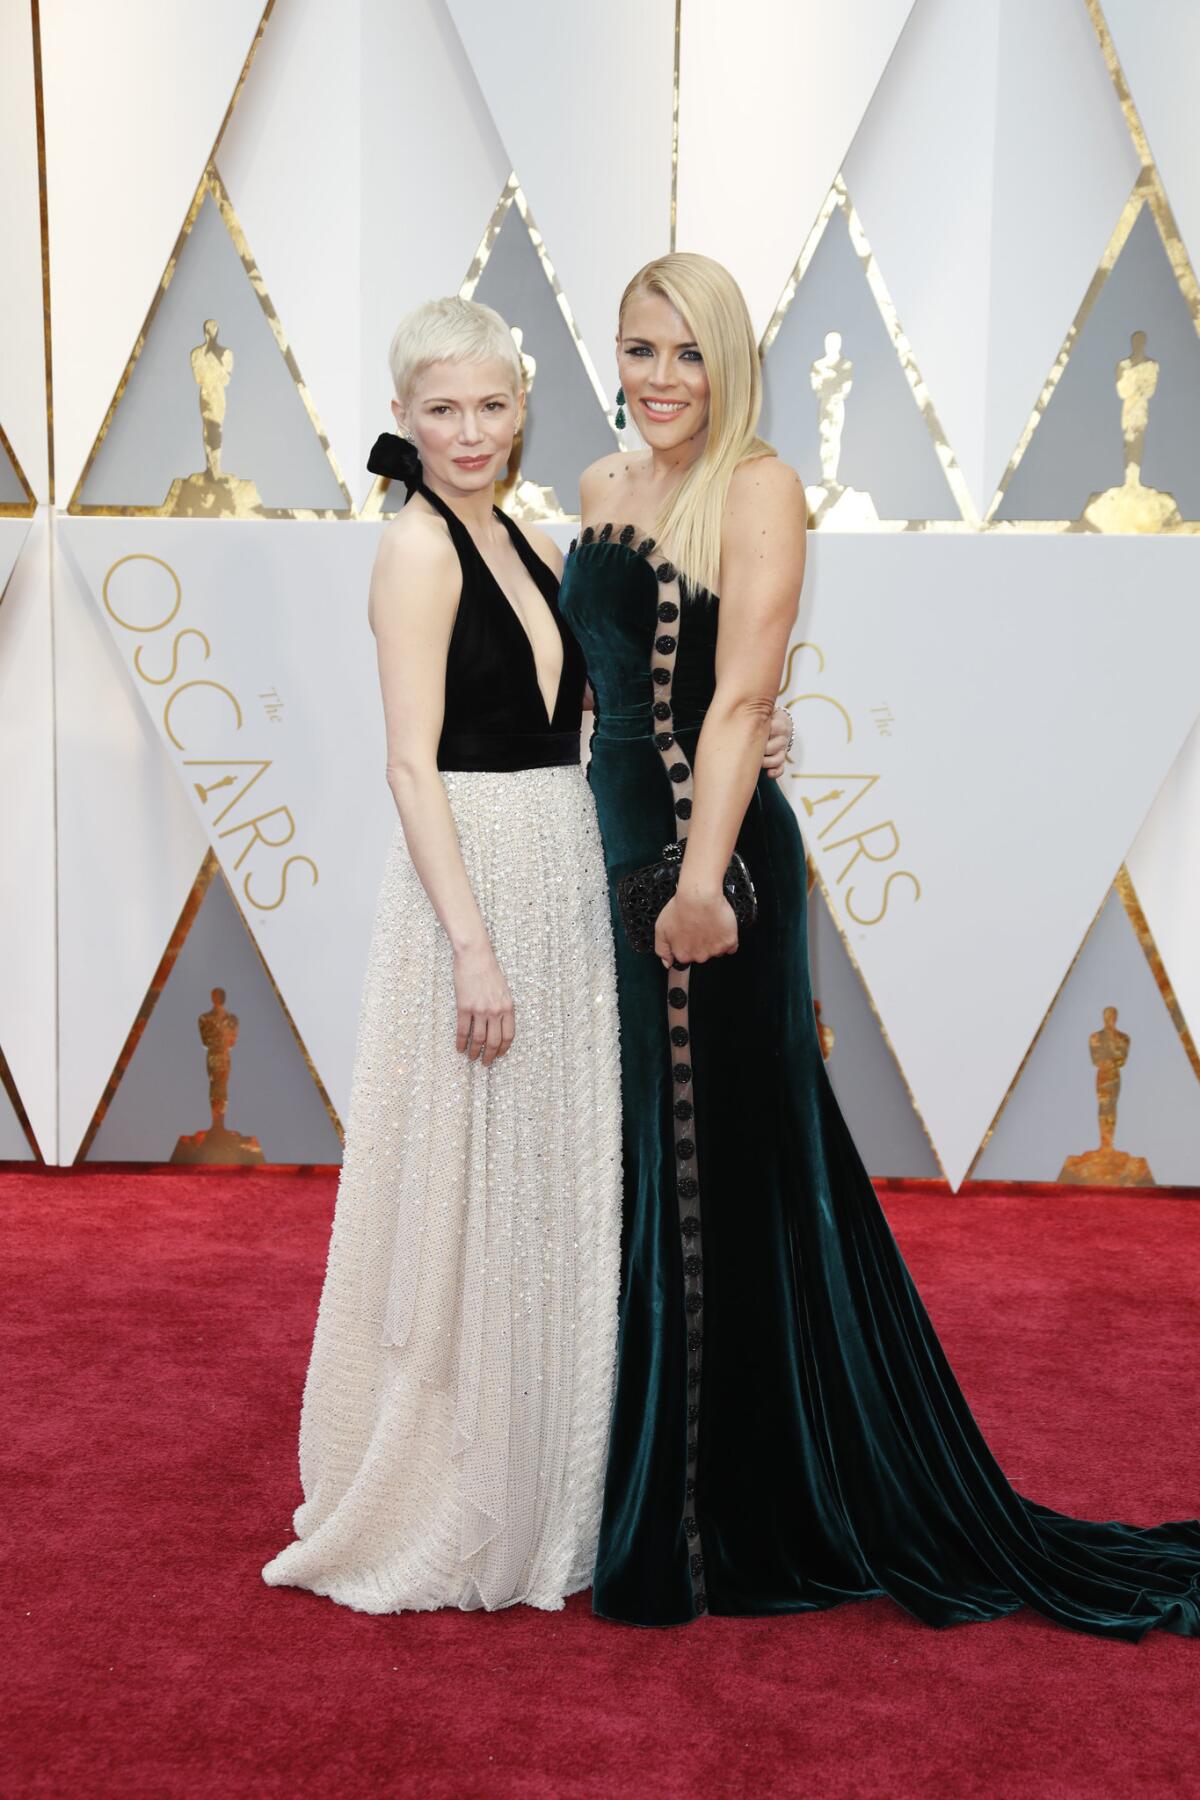 Best friends Michelle Williams, left, and Busy Philipps on the red carpet at the 89th Academy Awards on Feb. 26, 2017, at the Dolby Theatre in Hollywood.